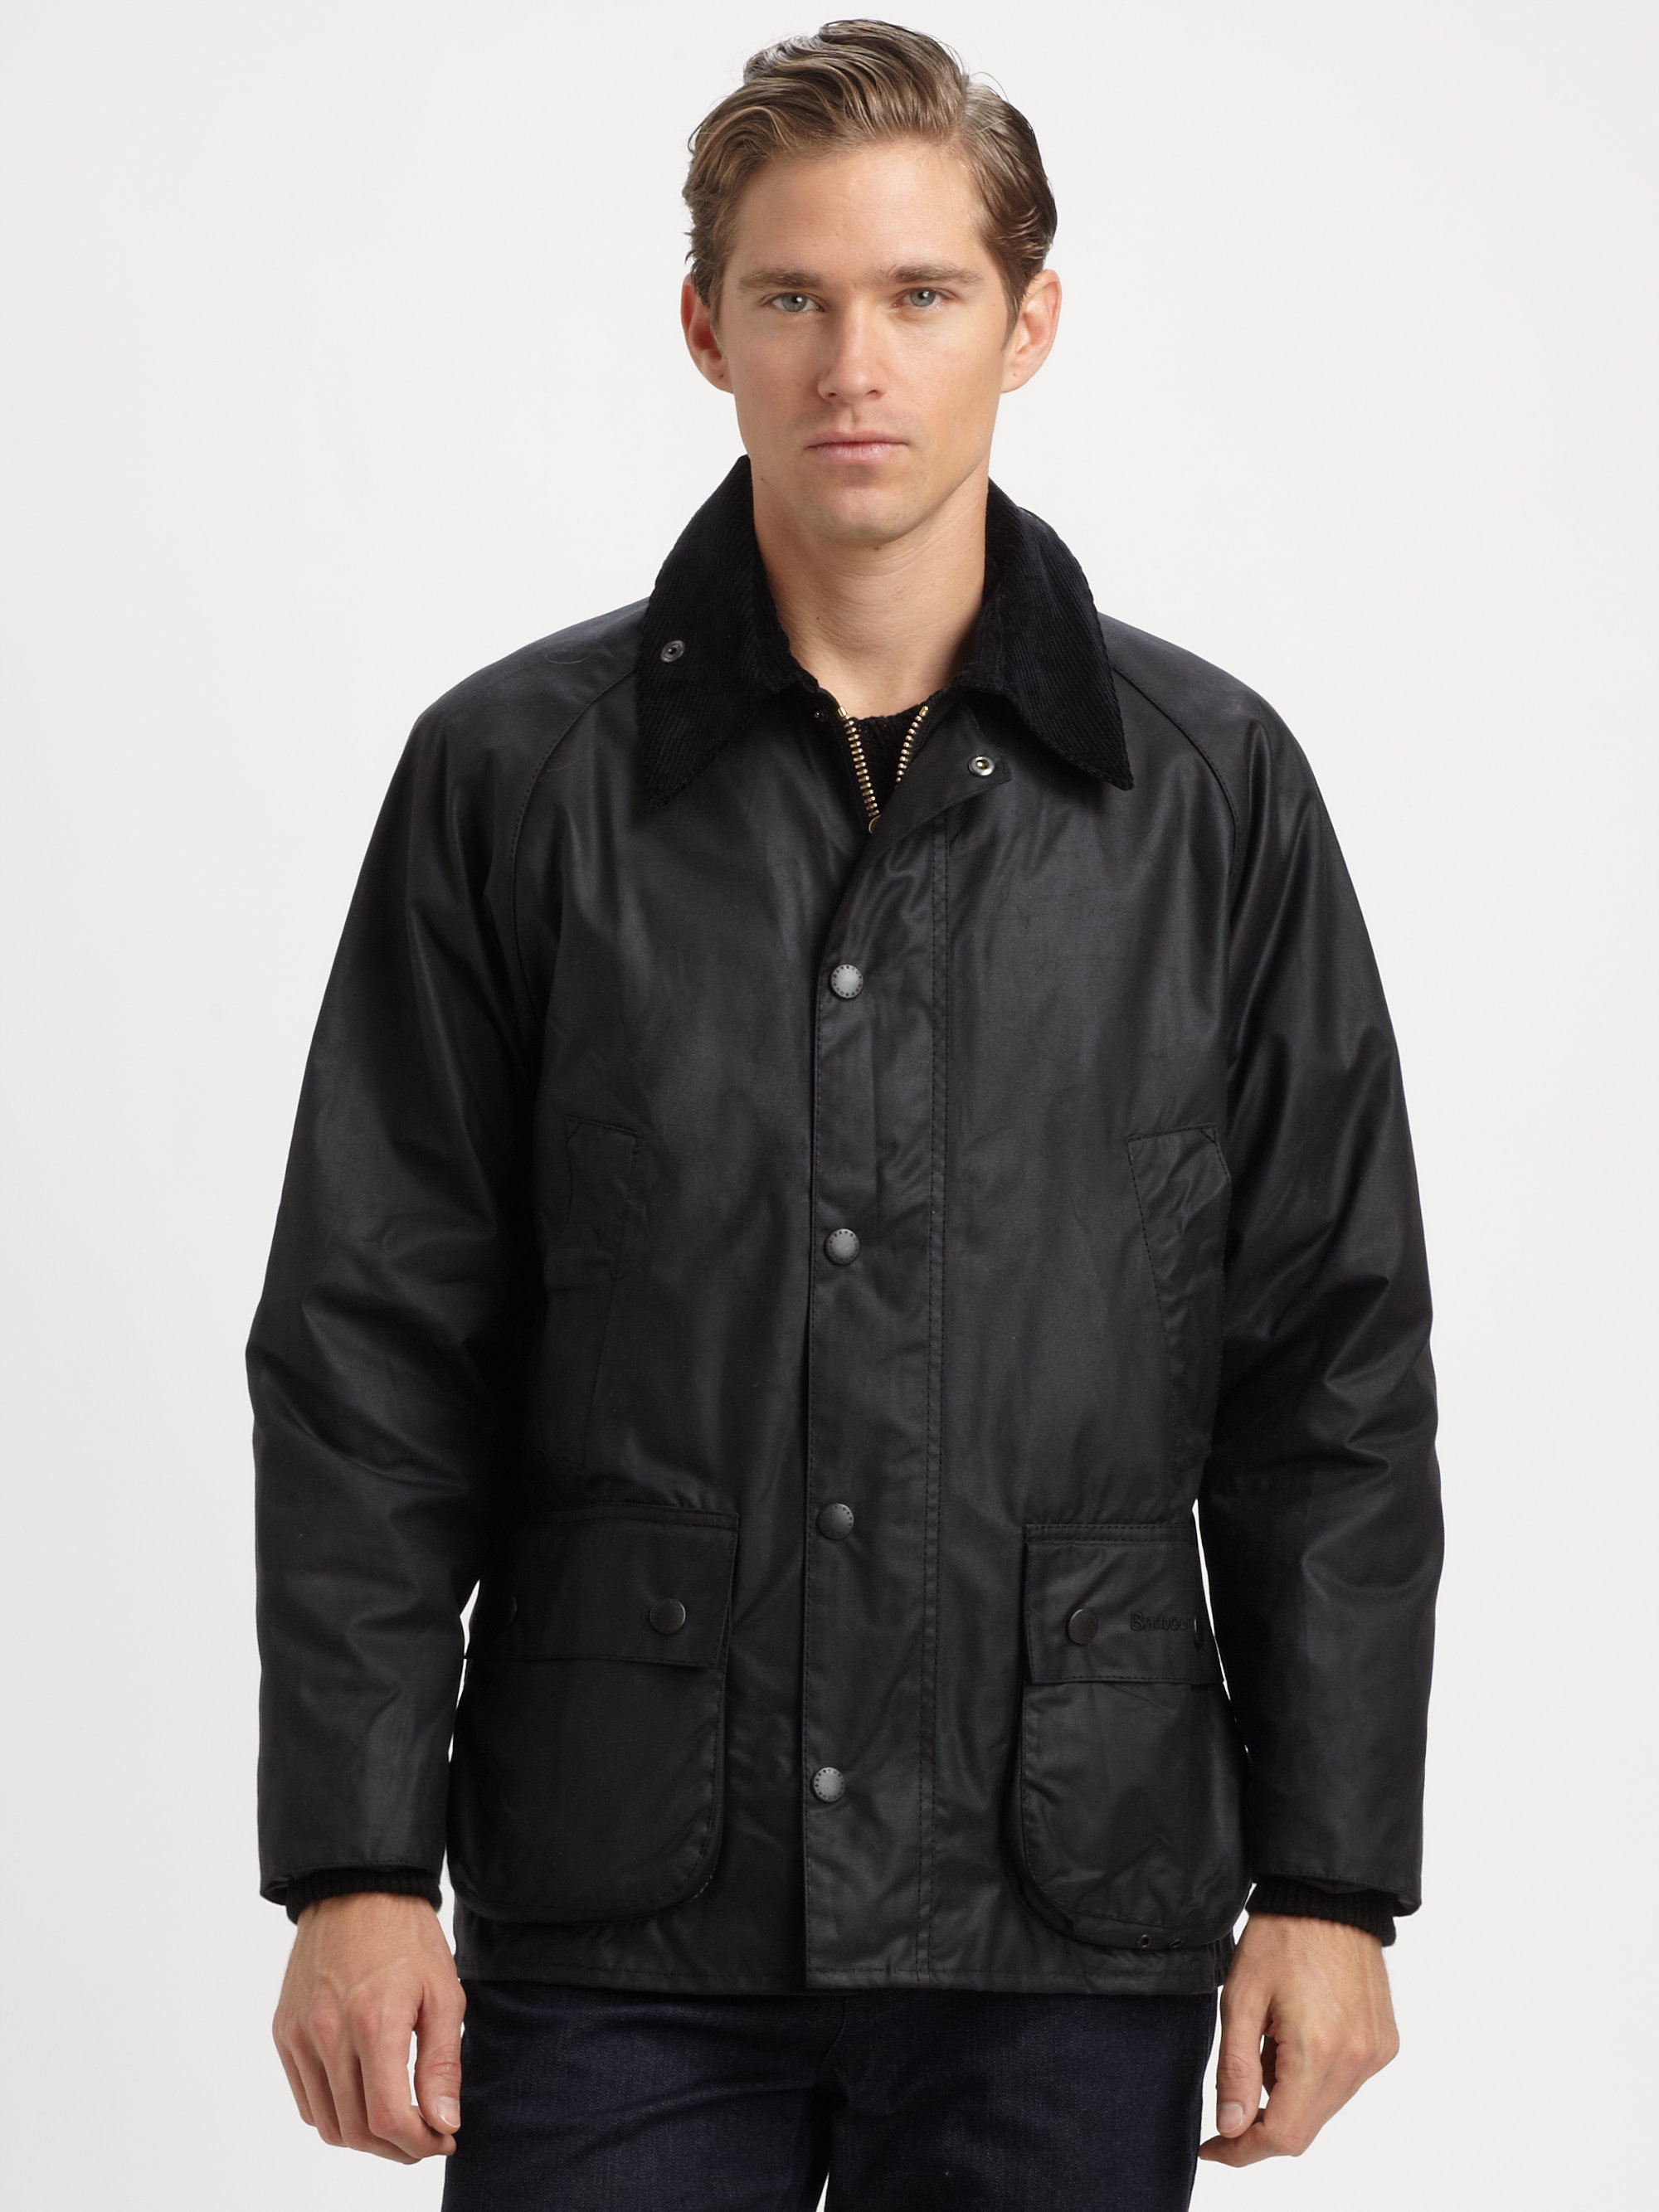 Barbour Bedale Waxed Cotton Jacket in Black for Men - Lyst